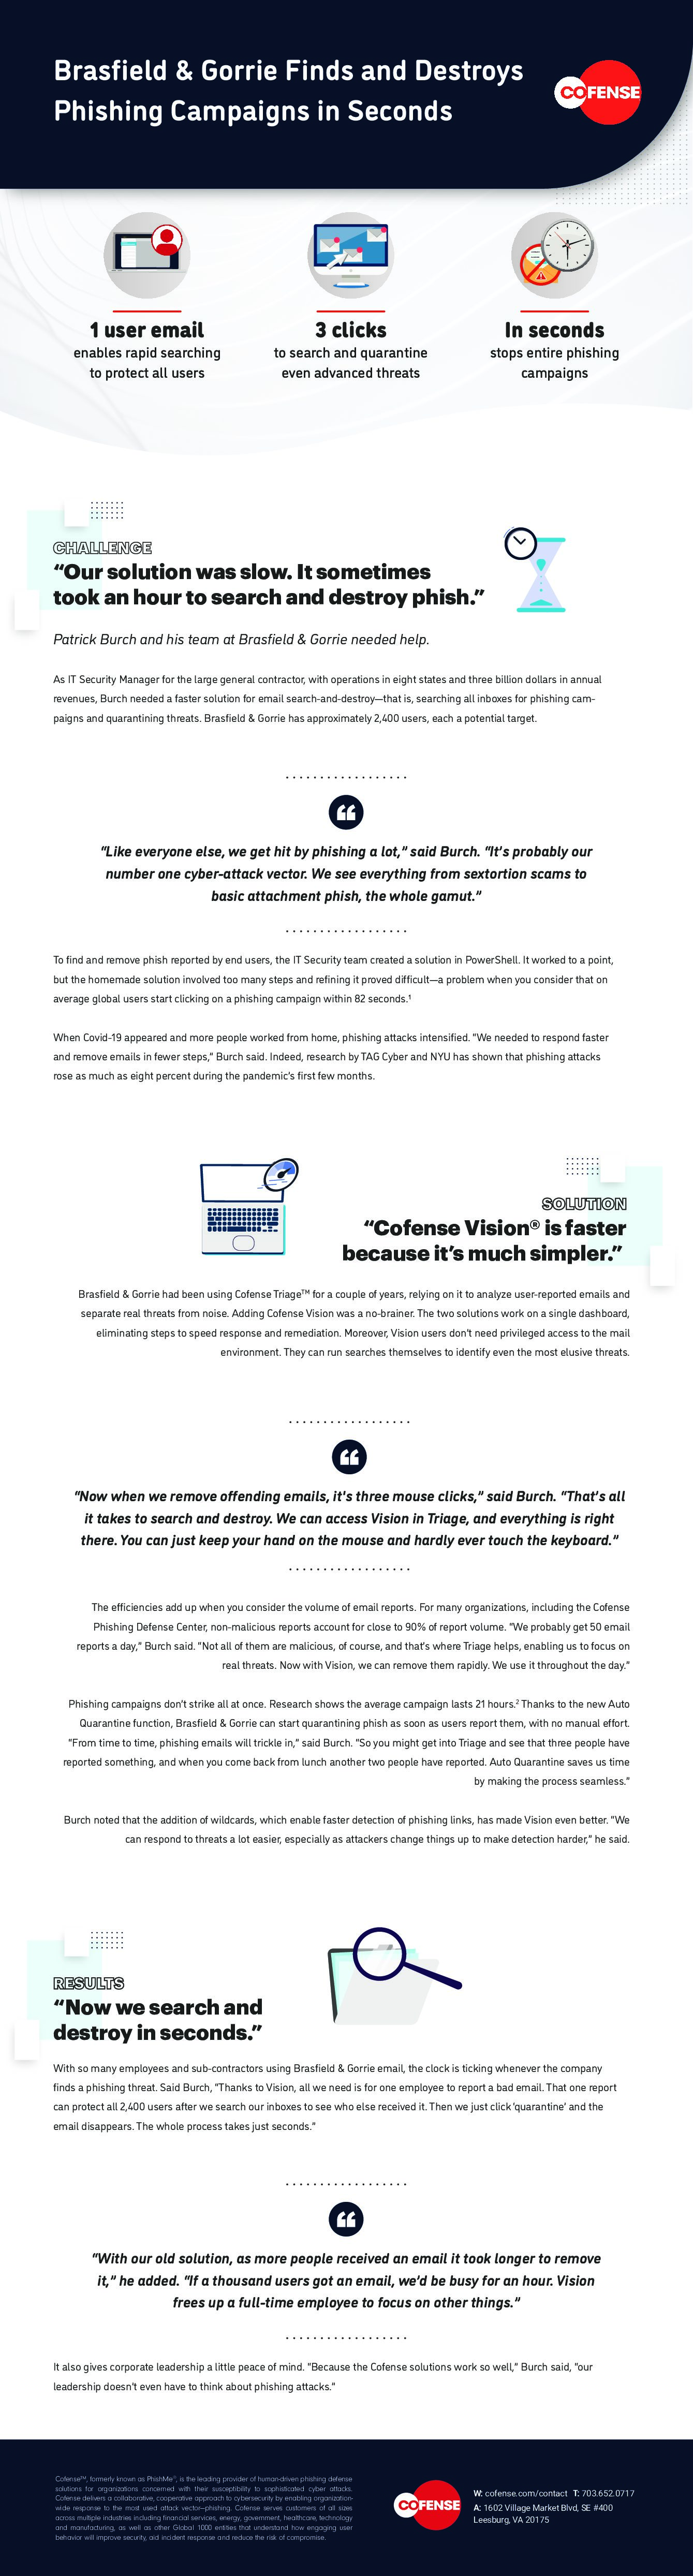 When Email Gateways Fail, the Impact is Severe | Infographic | Cofense